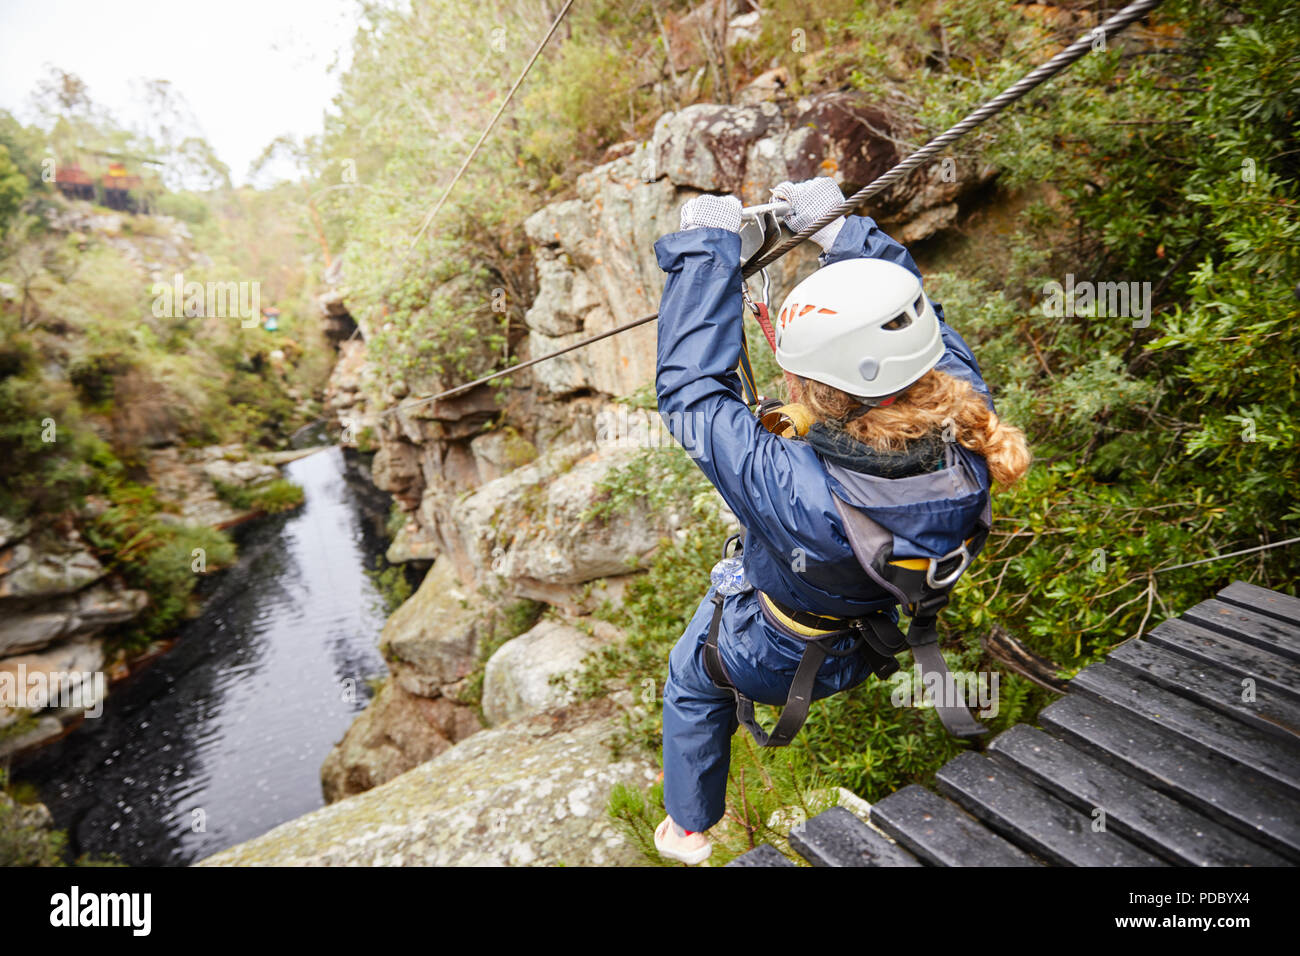 Woman zip lining over pond in woods Stock Photo